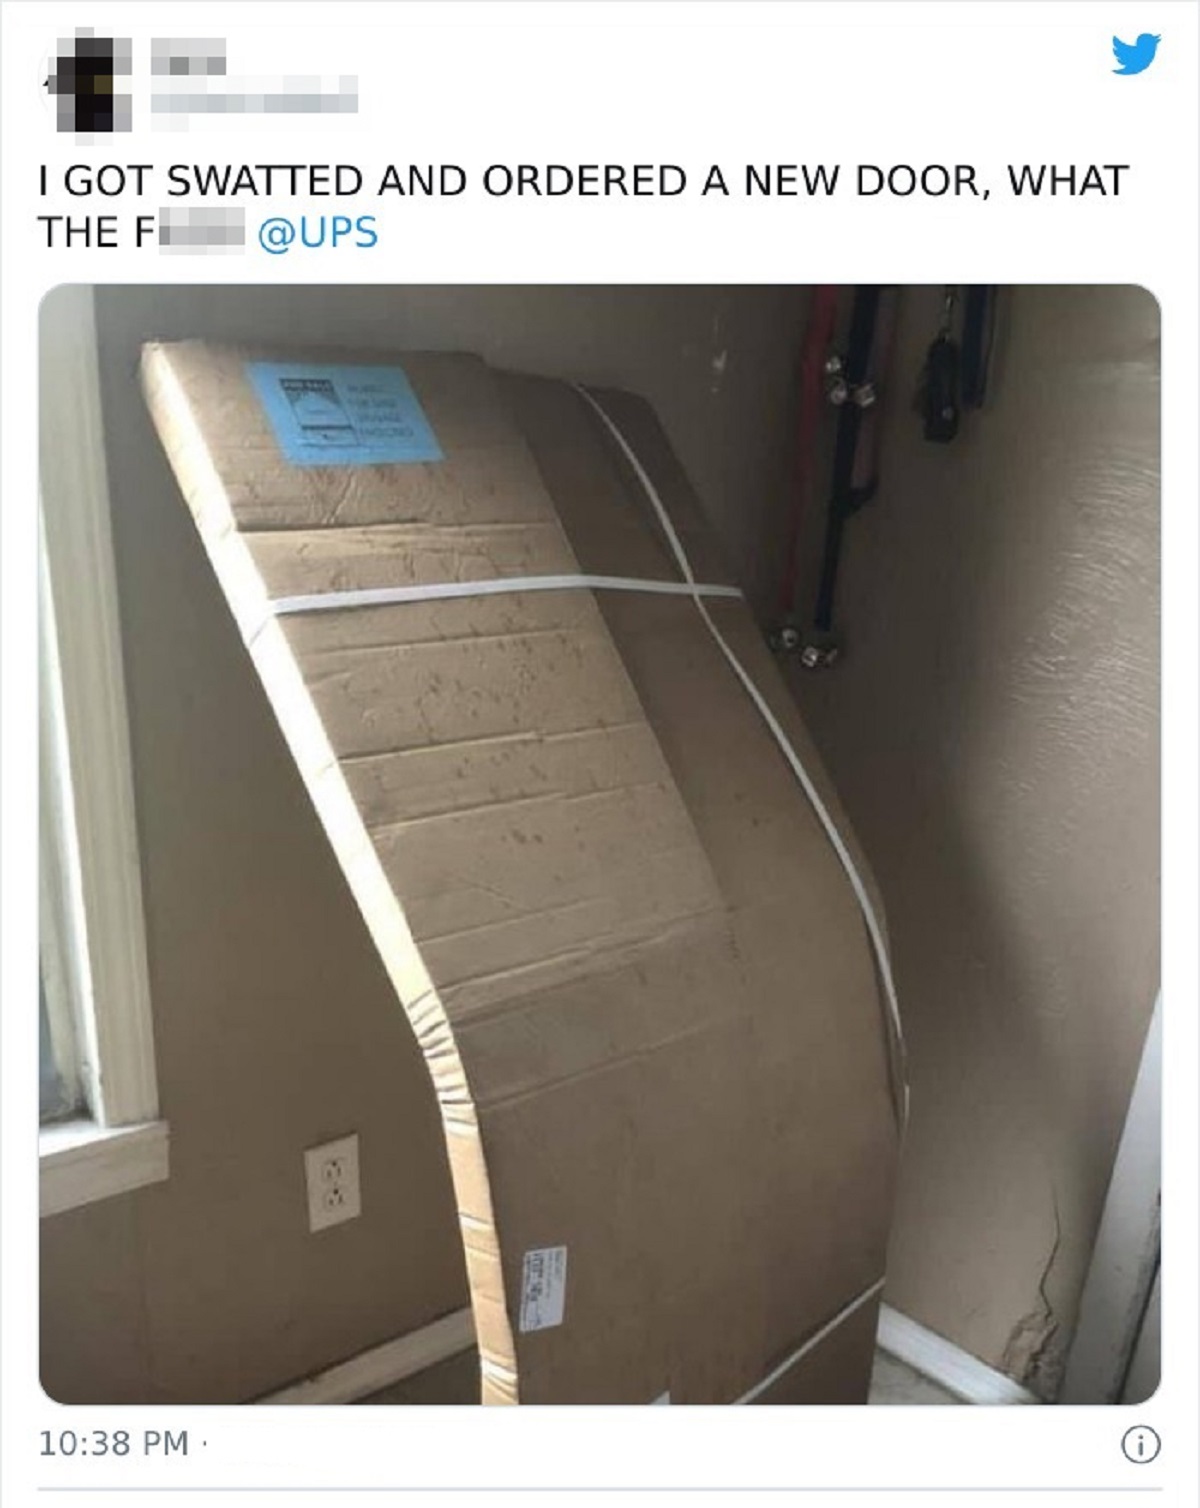 ups bends a door - I Got Swatted And Ordered A New Door, What The F